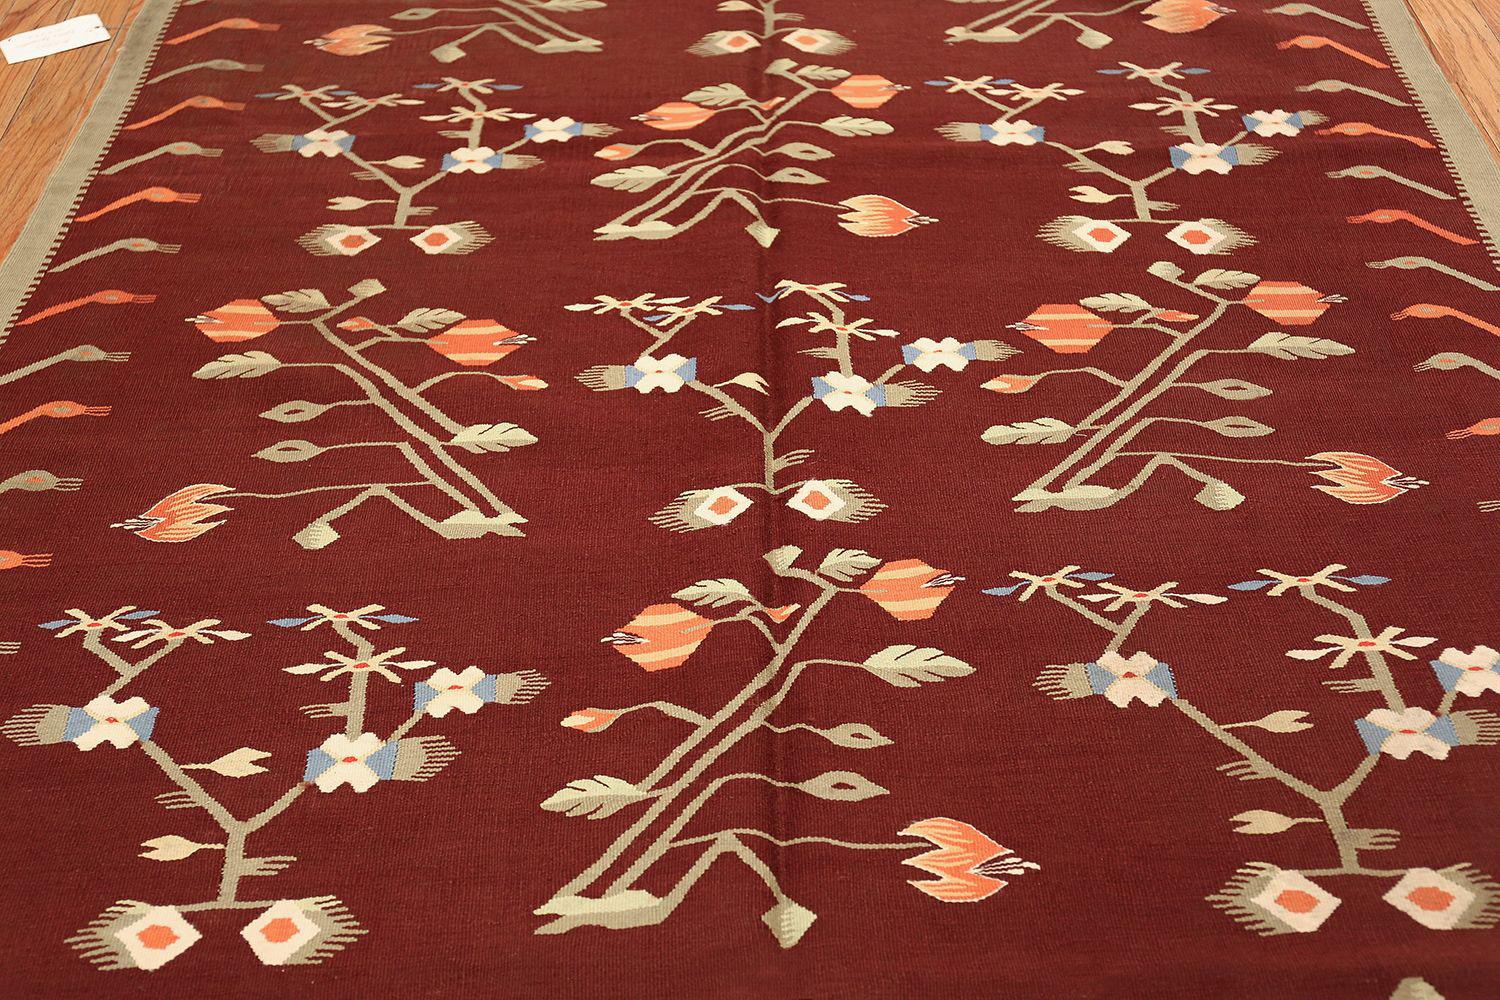 20th Century Vintage Flat-Woven Bessarabian Kilim Rug. Size: 5 ft 8 in x 8 ft 6 in